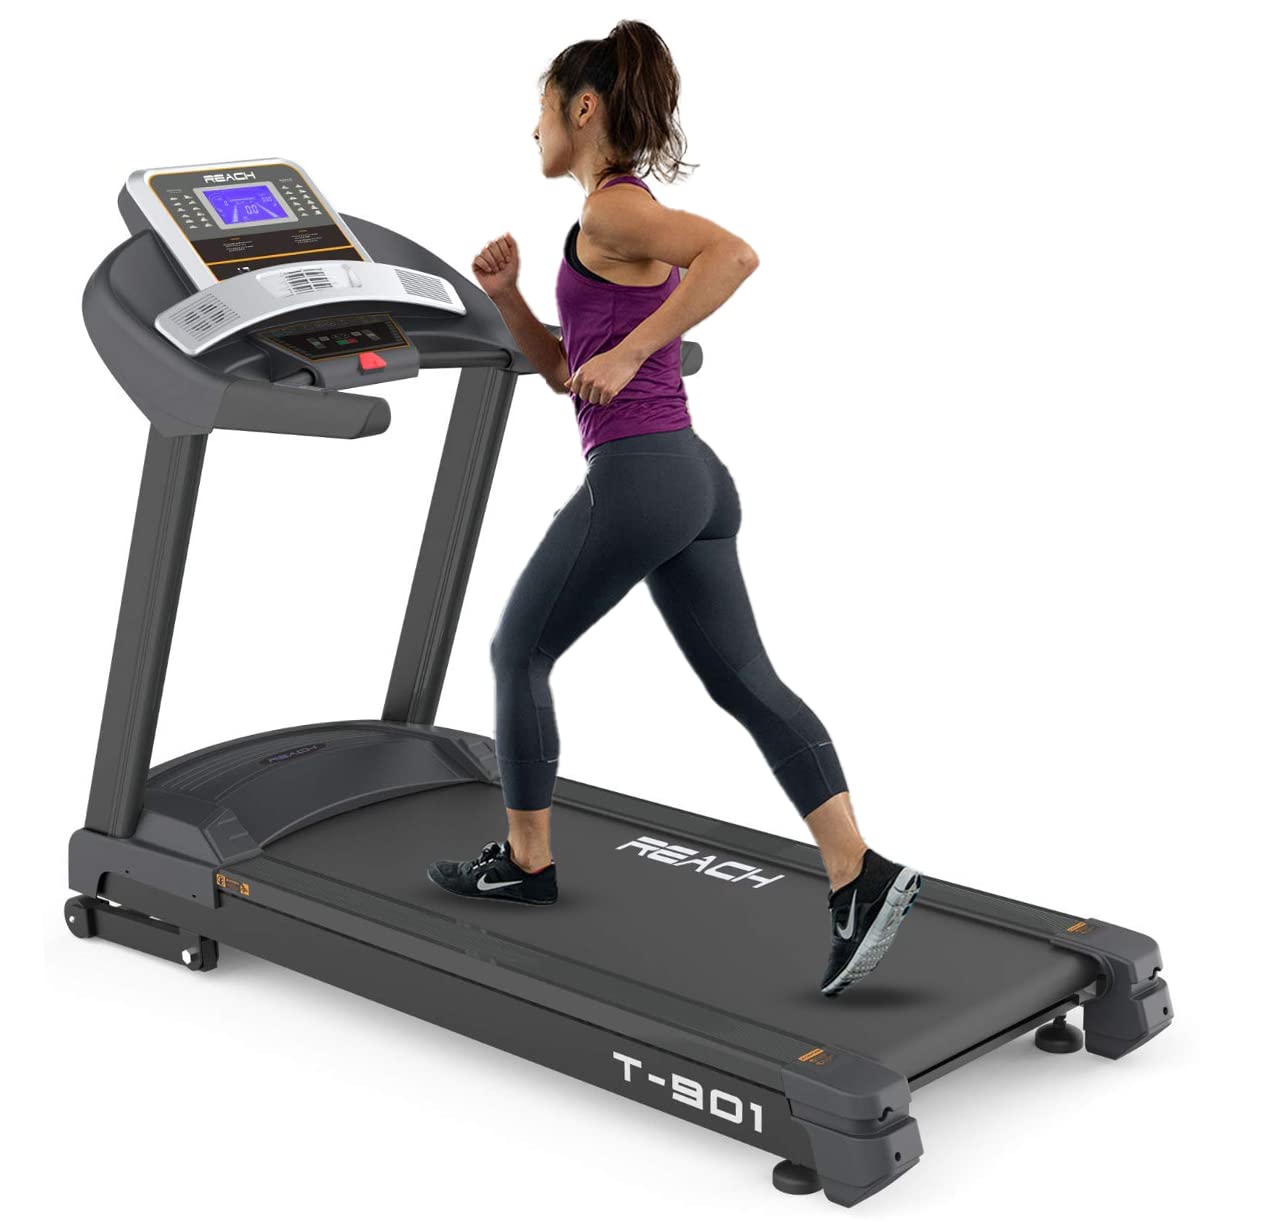 Reach T-901 7 HP Peak DC Motor Premium Treadmill | Automatic Incline with Powerful Motor | Home Exercise & Running Machine | LCD Display with 24 Preset Programs | 24 km/hr Max User Weight 130 Kgs